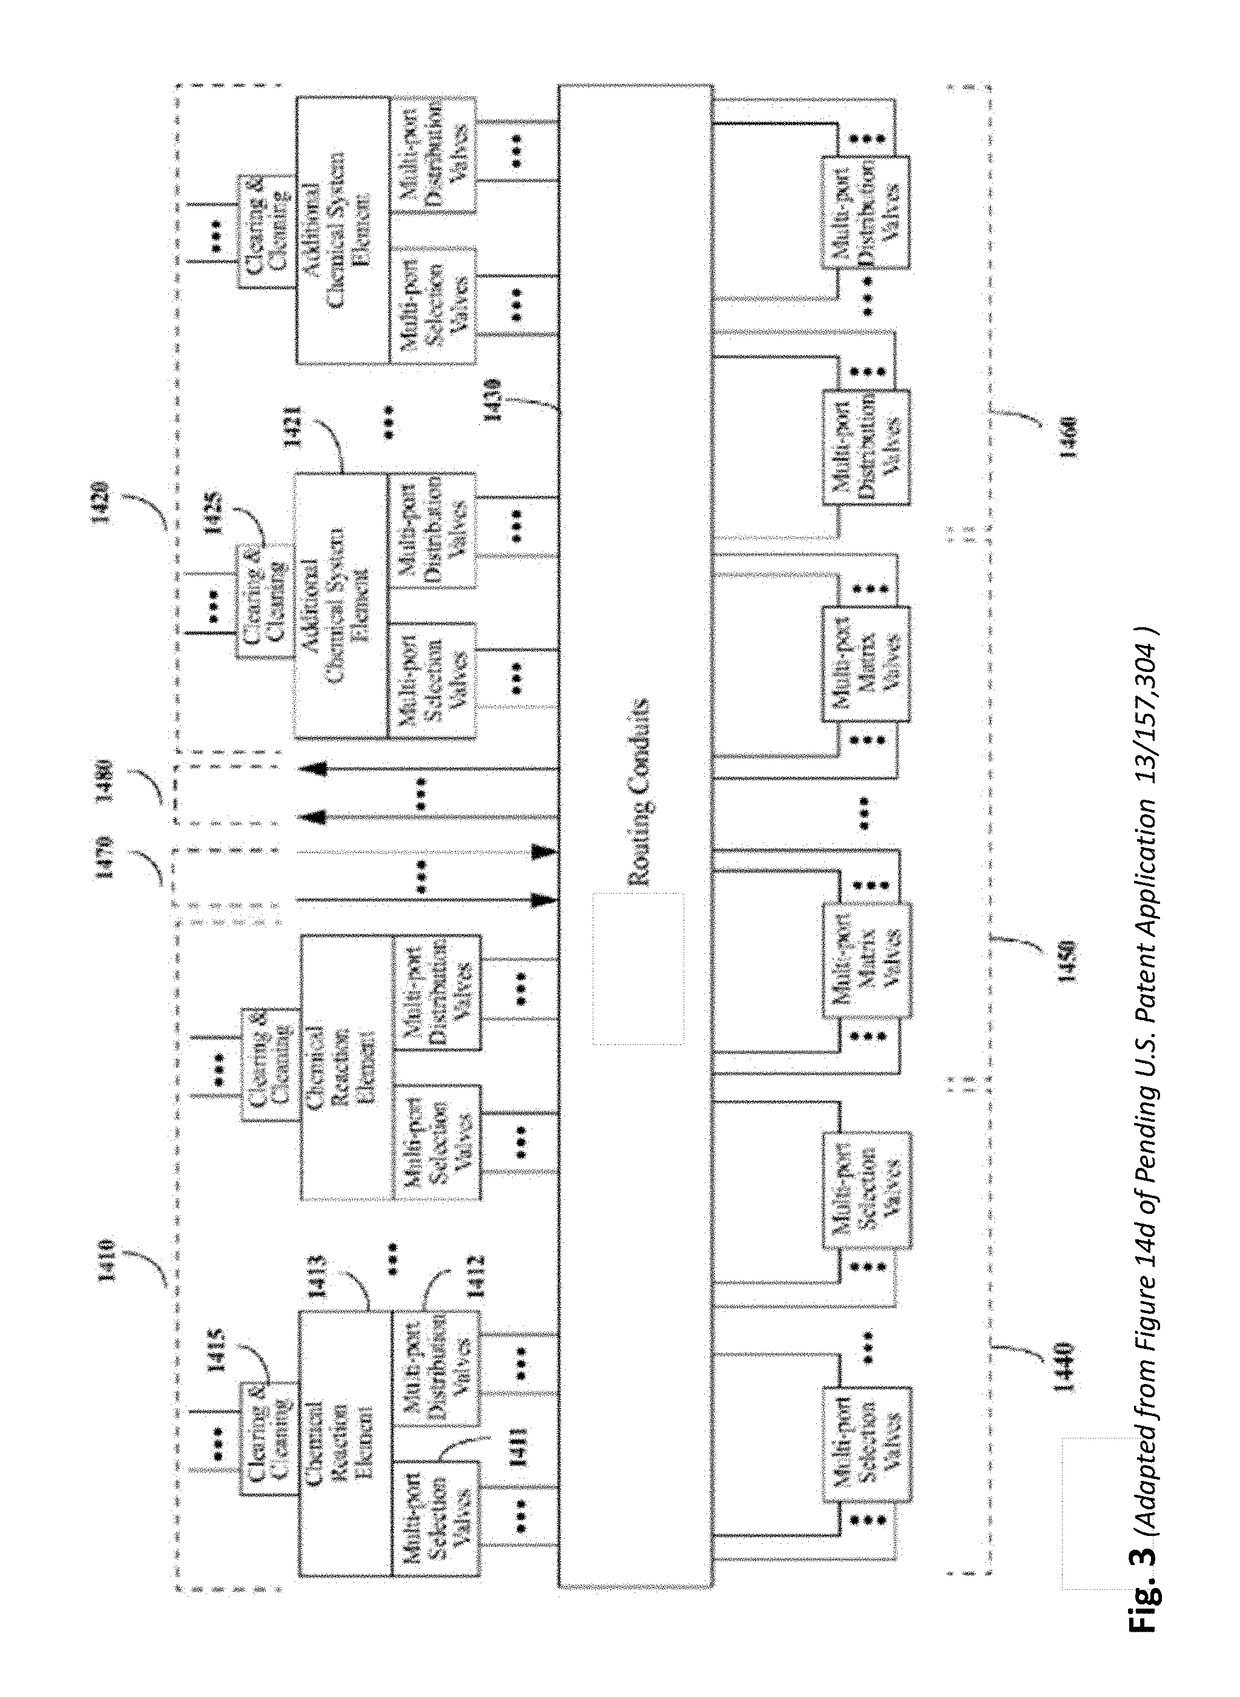 Software controlled transport and operation processes for fluidic and microfluidic systems, temporal and event-driven control sequence scripting, functional libraries, and script creation tools